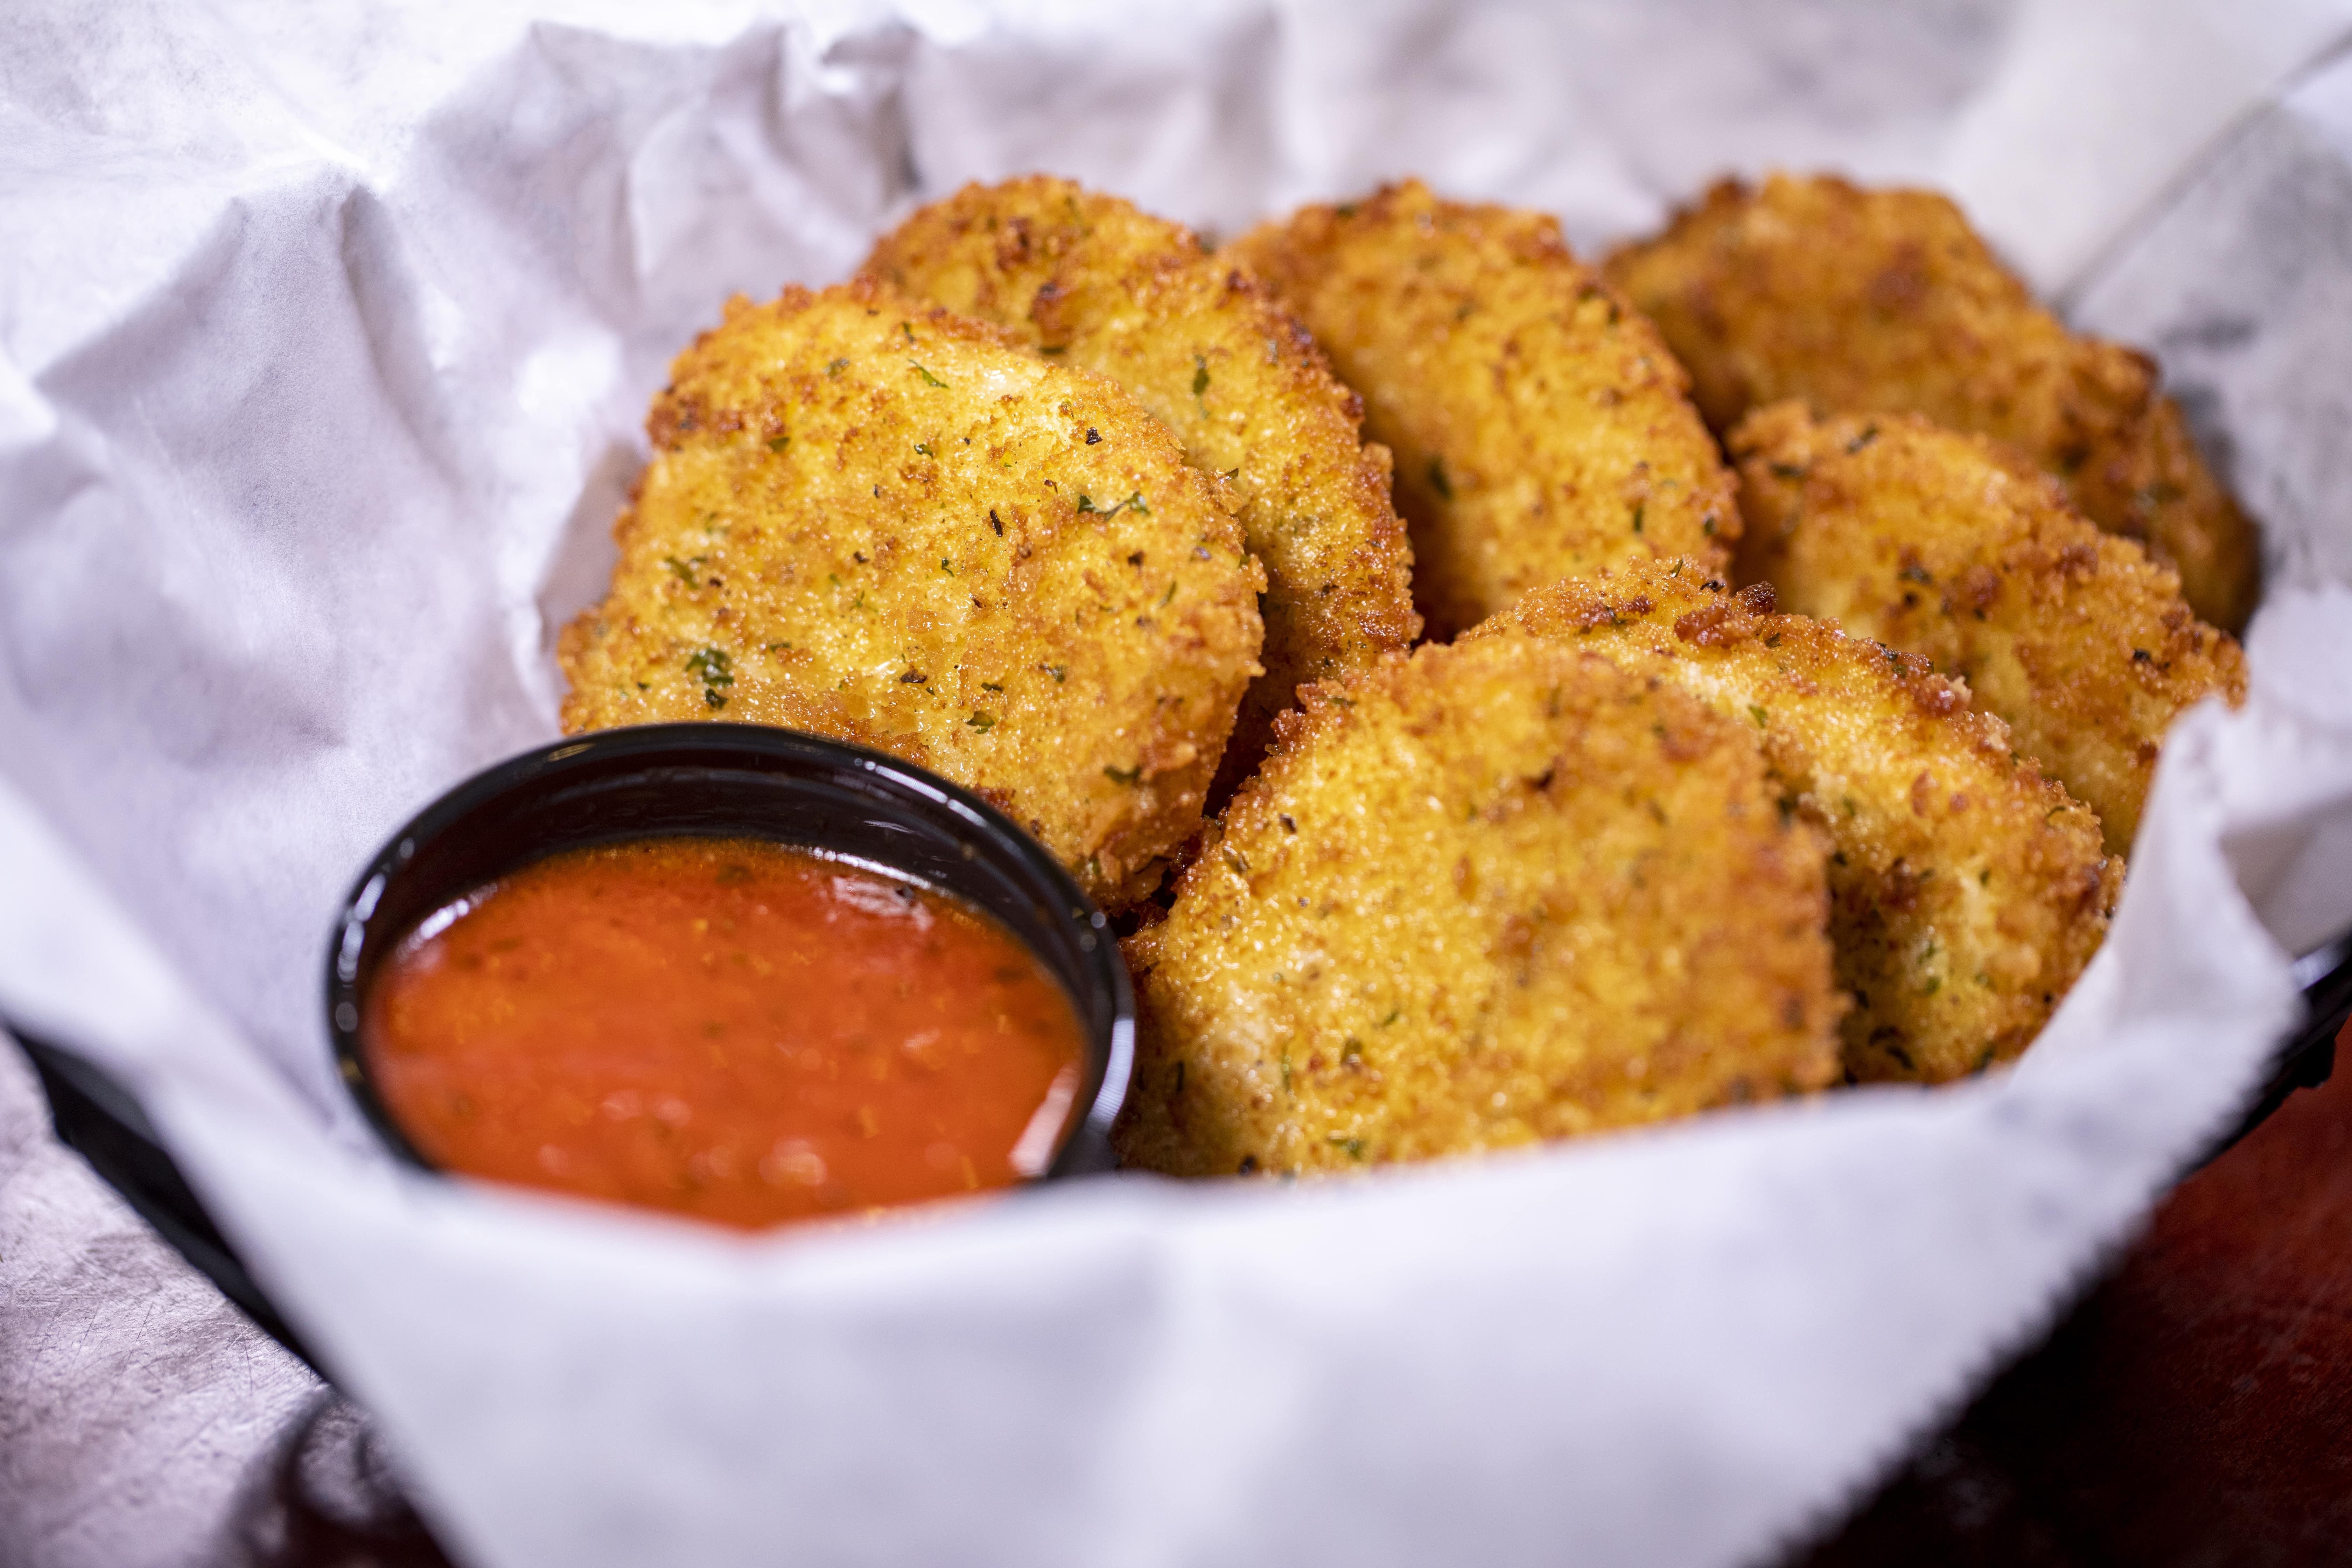 Breaded cheese rounds